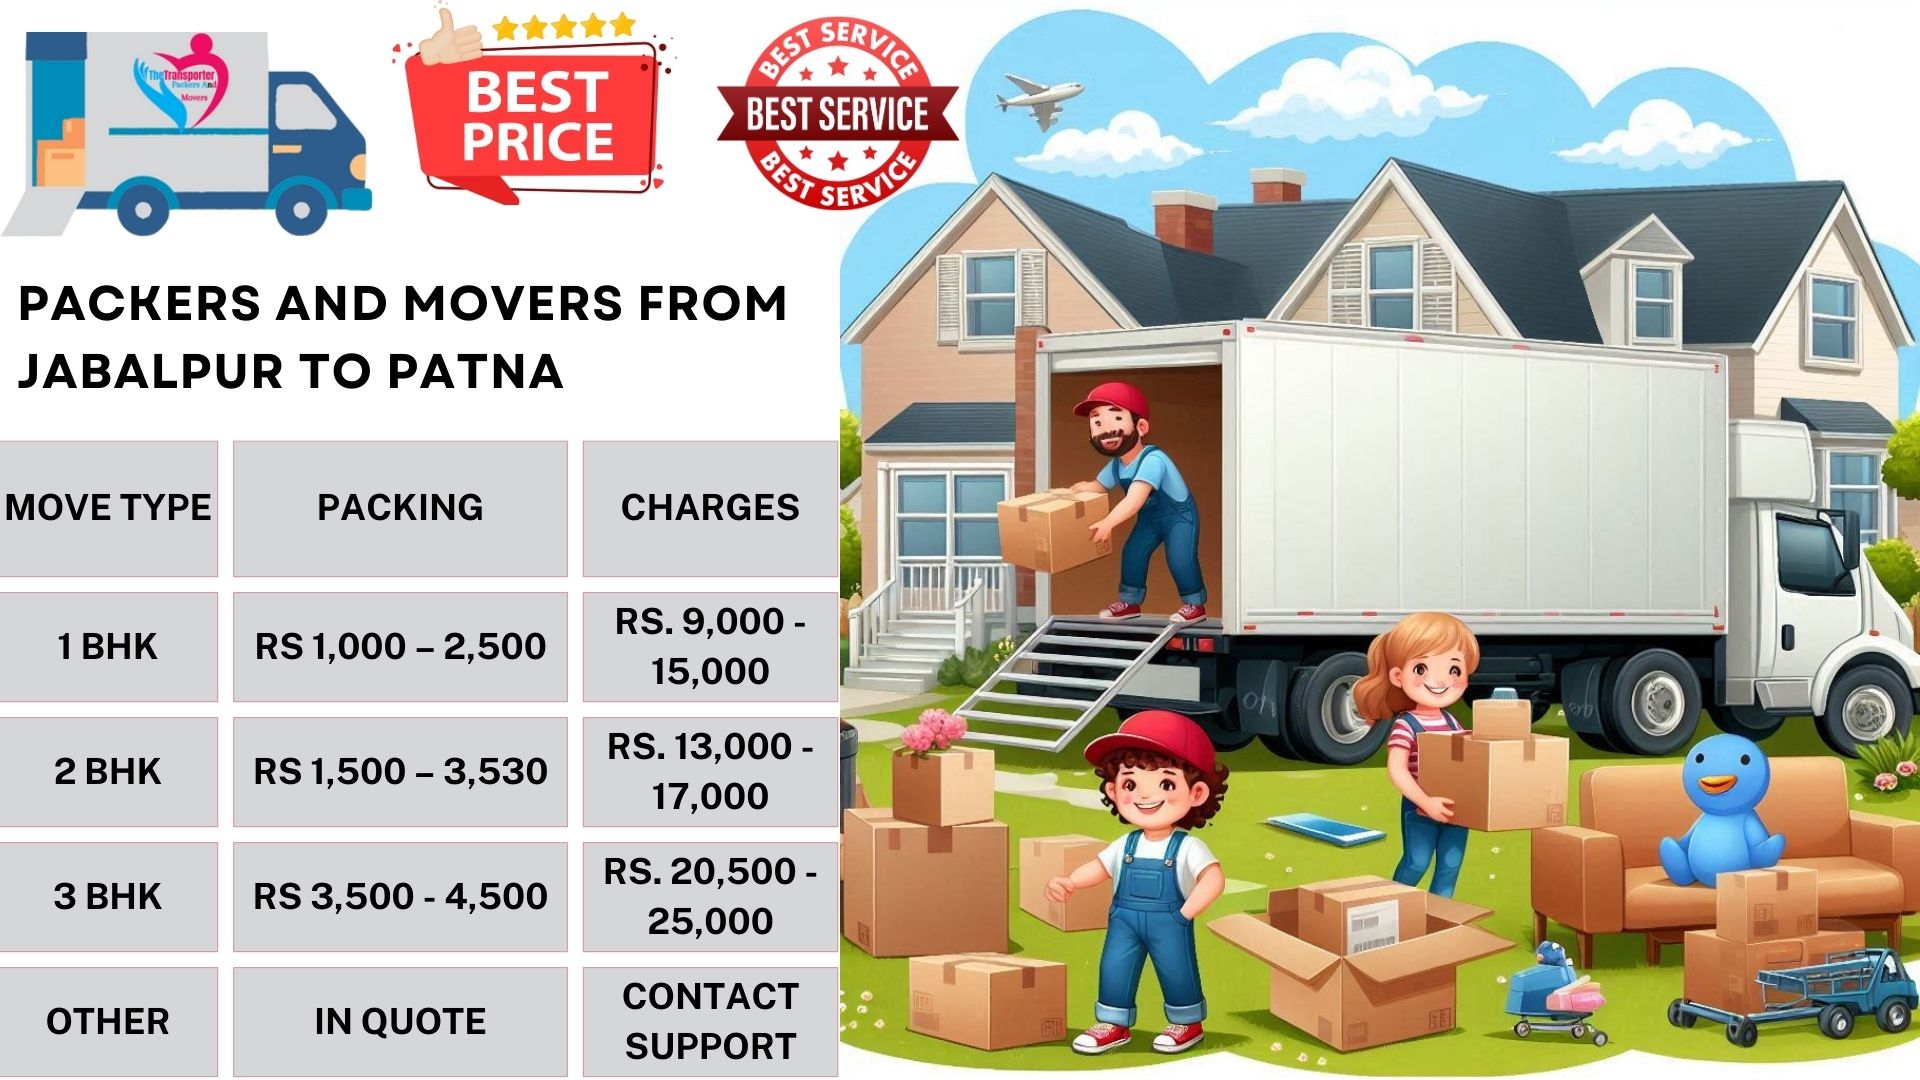 Your household goods shifting from Jabalpur to Patna